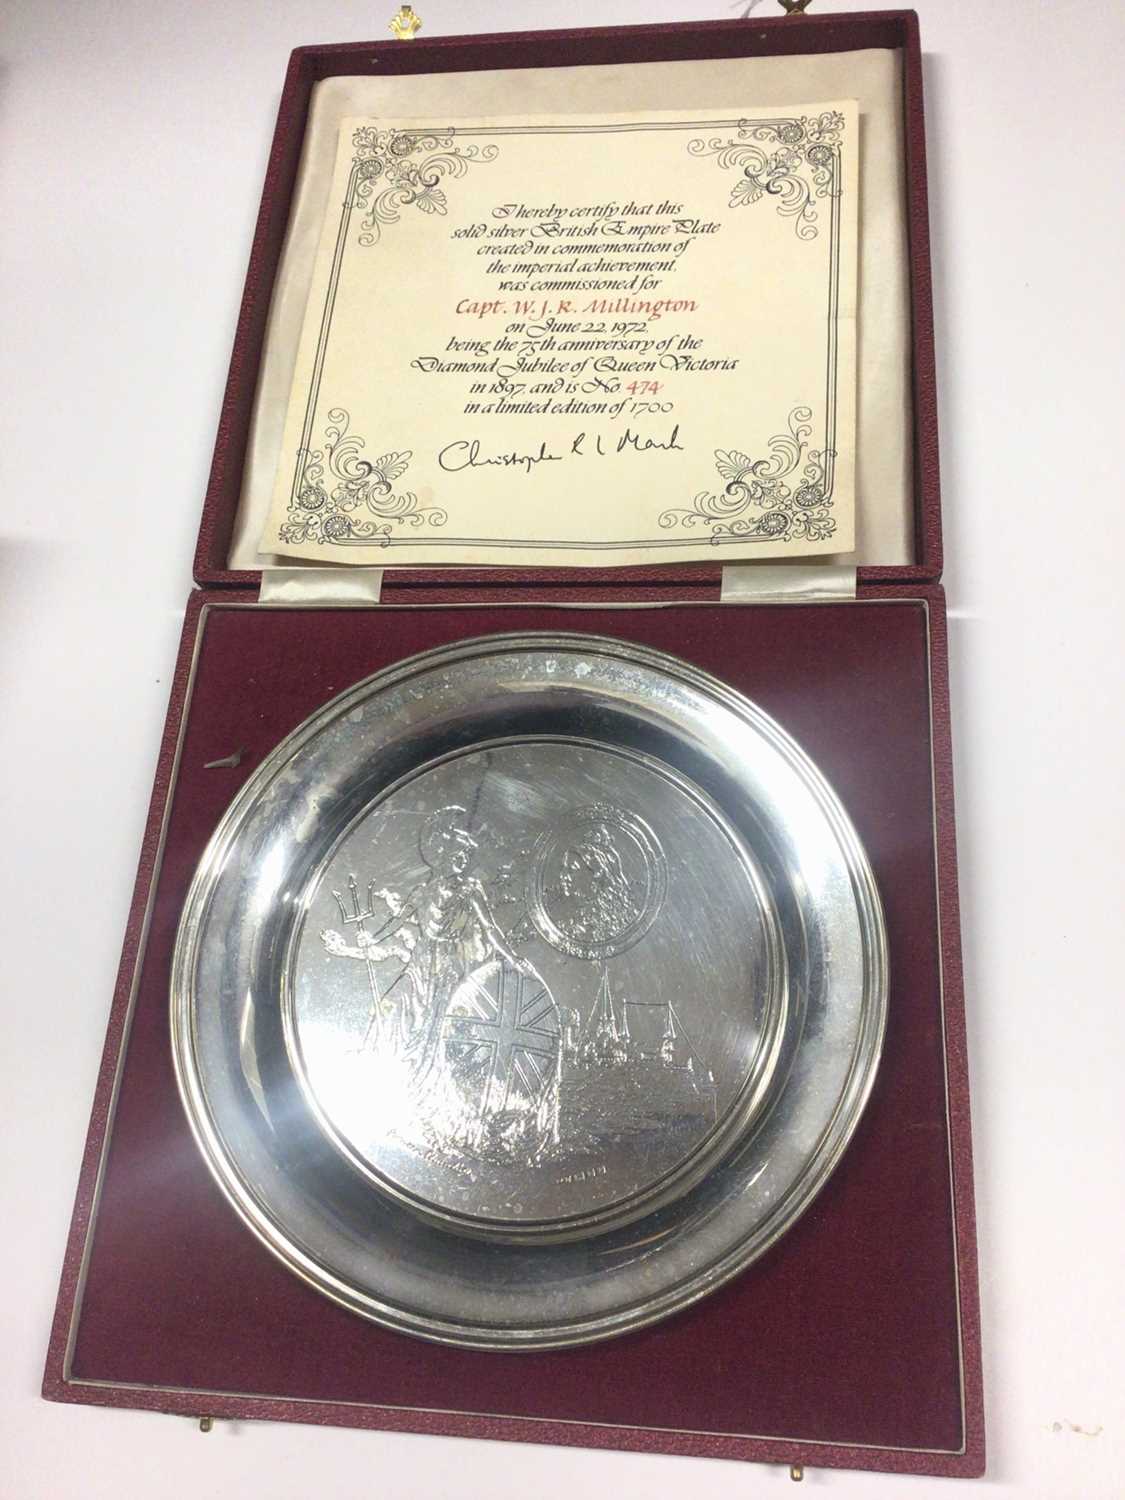 Silver commemorative British Empire dish, in fitted case with certificate, numbered 474 of 1700. (Lo